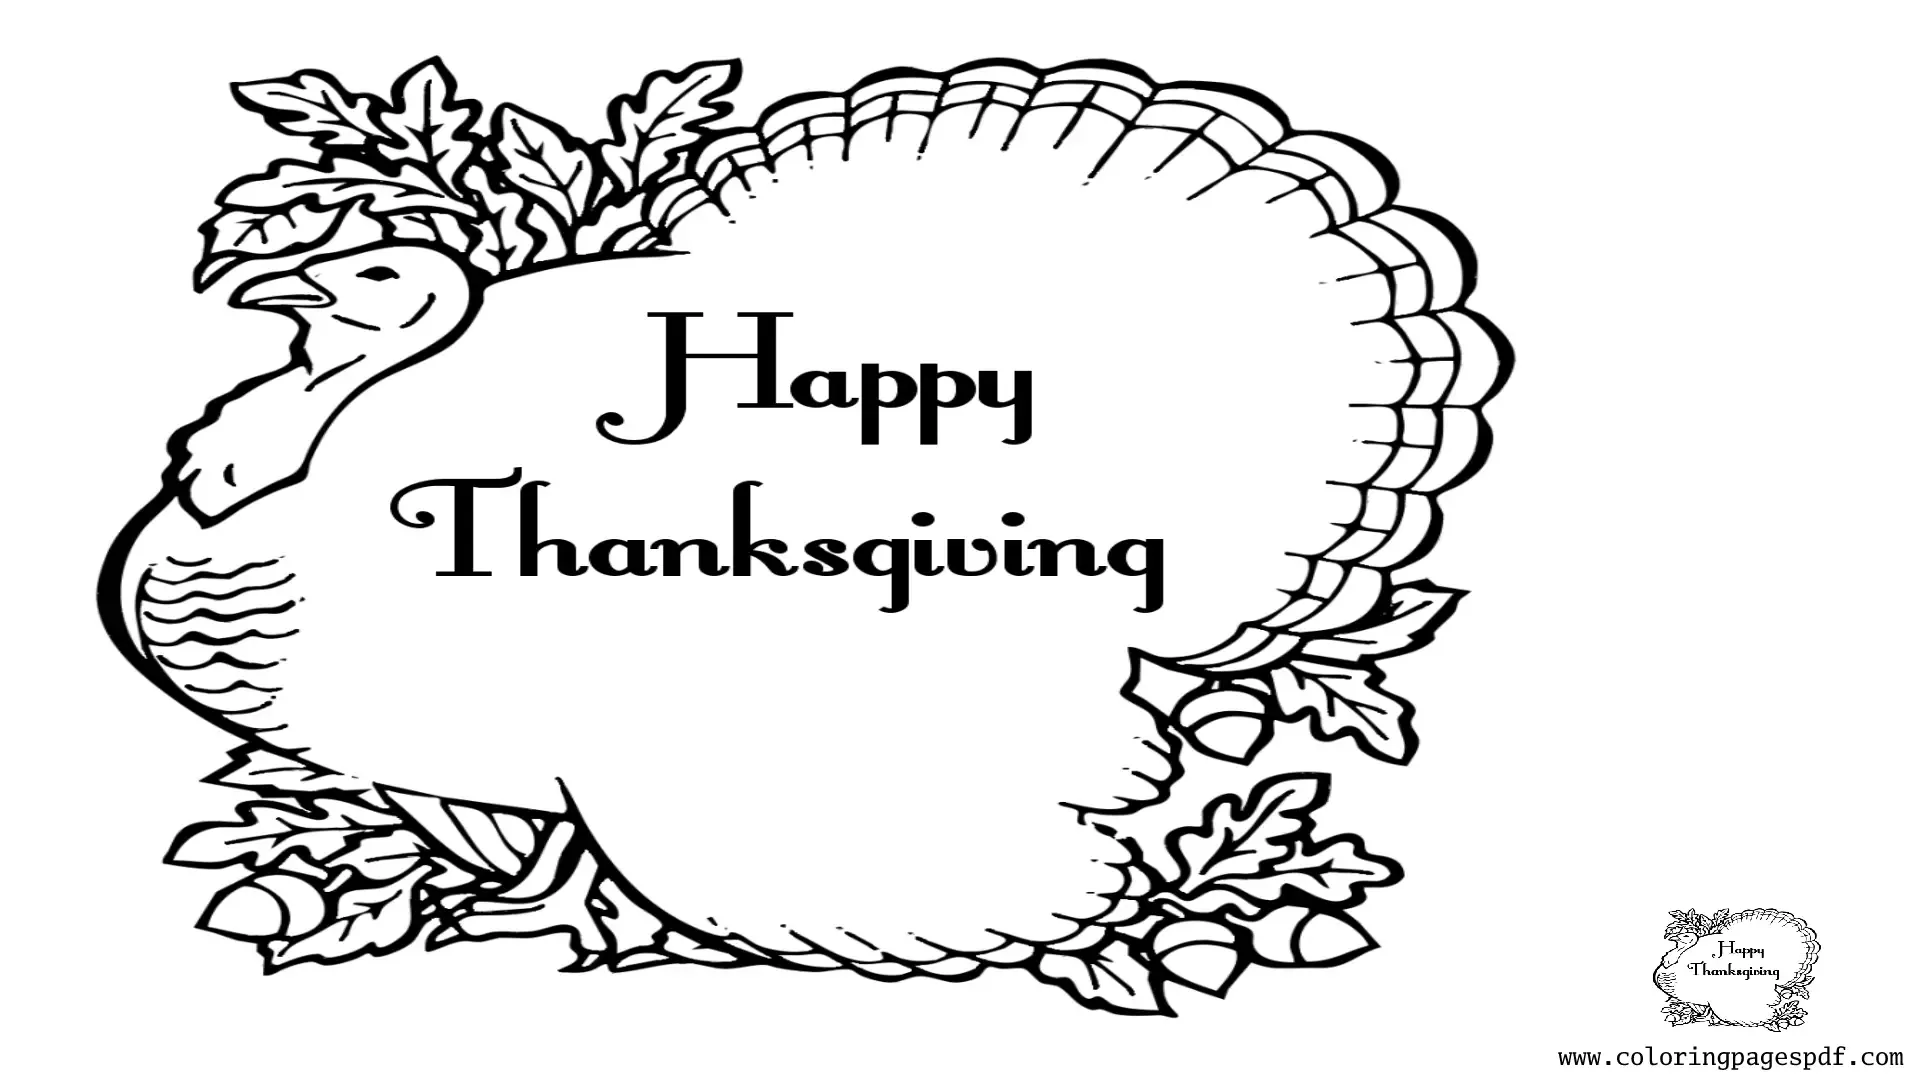 Coloring Page Of A Big Turkey With A Written Happy Thanksgiving Text